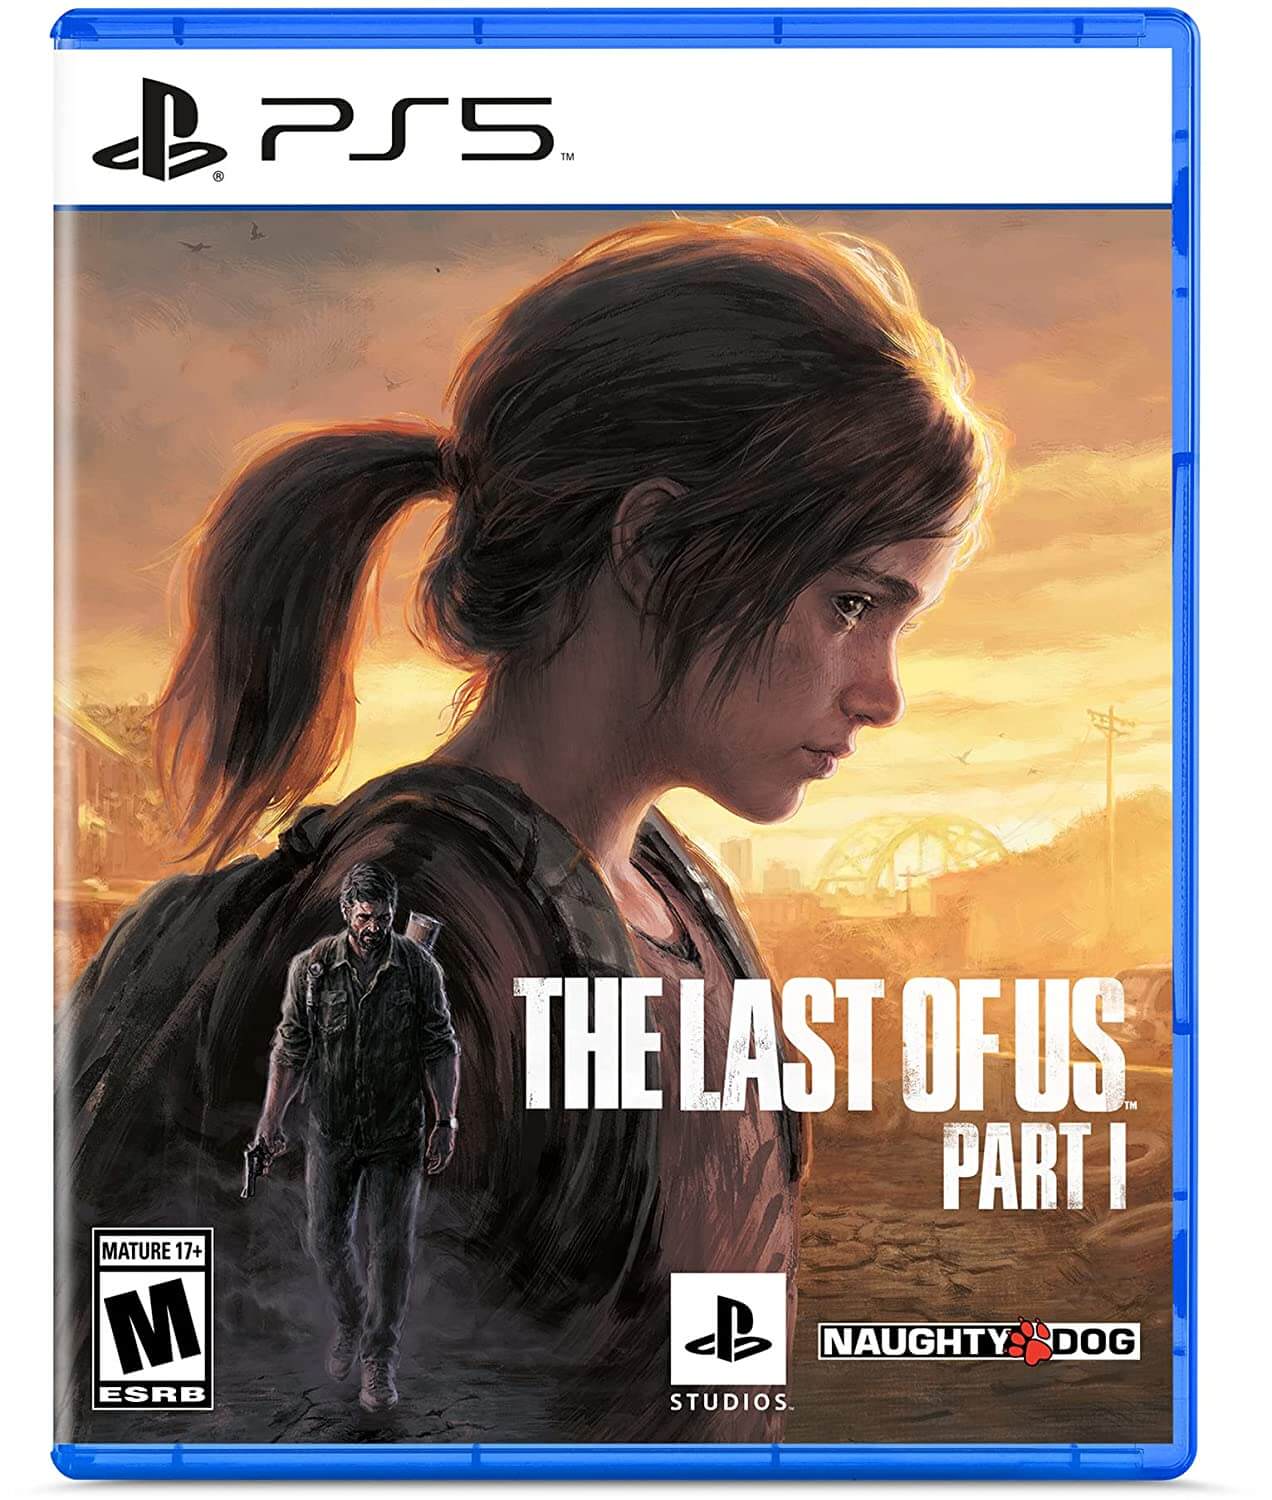 The Last of Us 